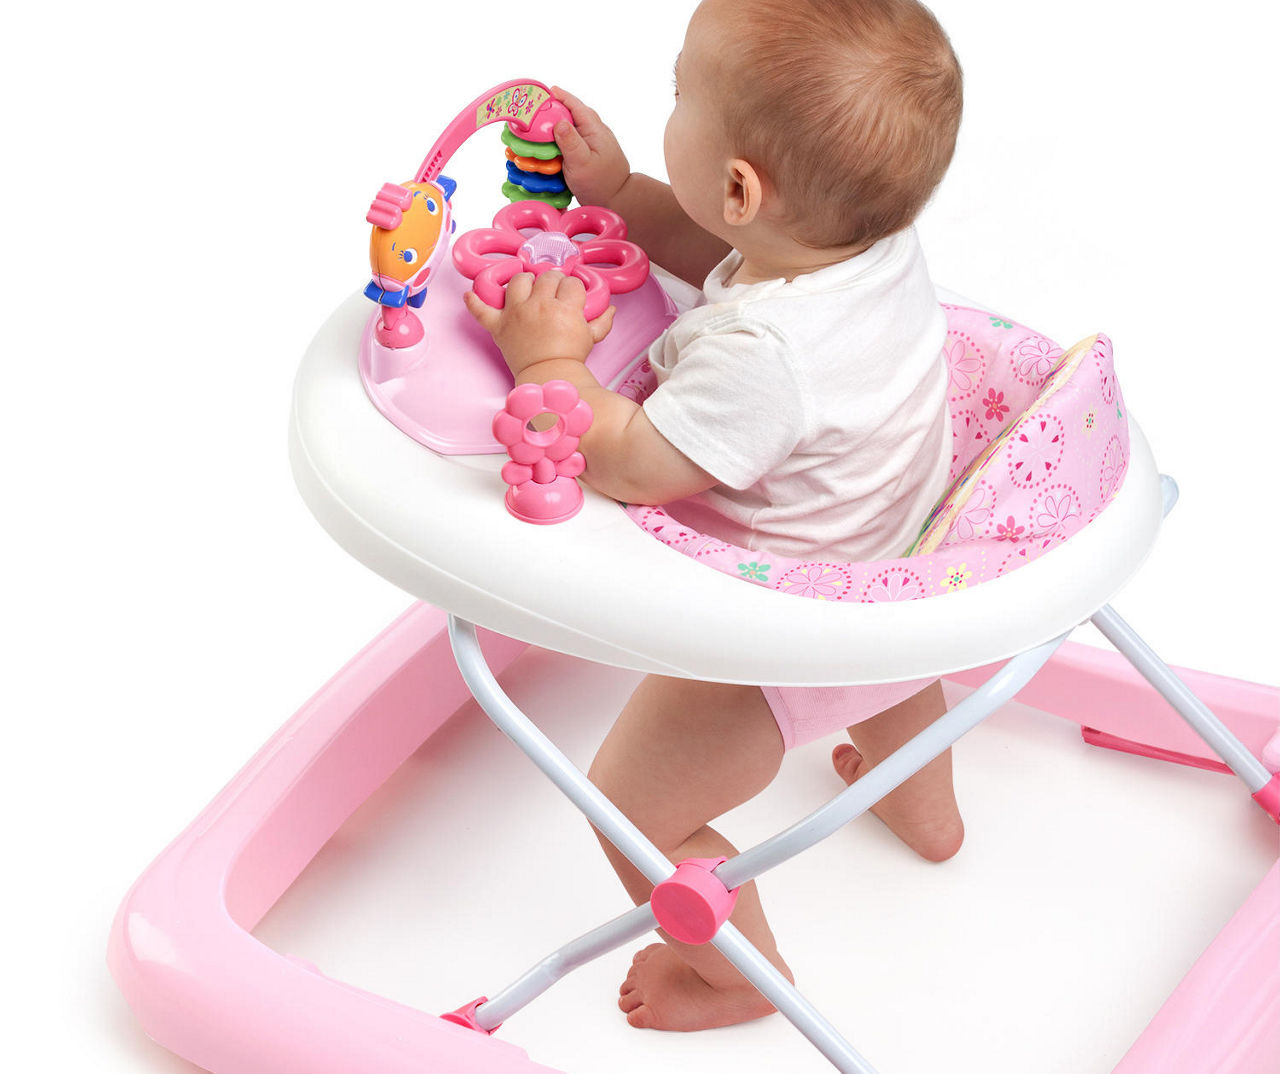 Bright Starts Pretty in Pink JuneBerry Delight Walk-A-Bout Baby Walker